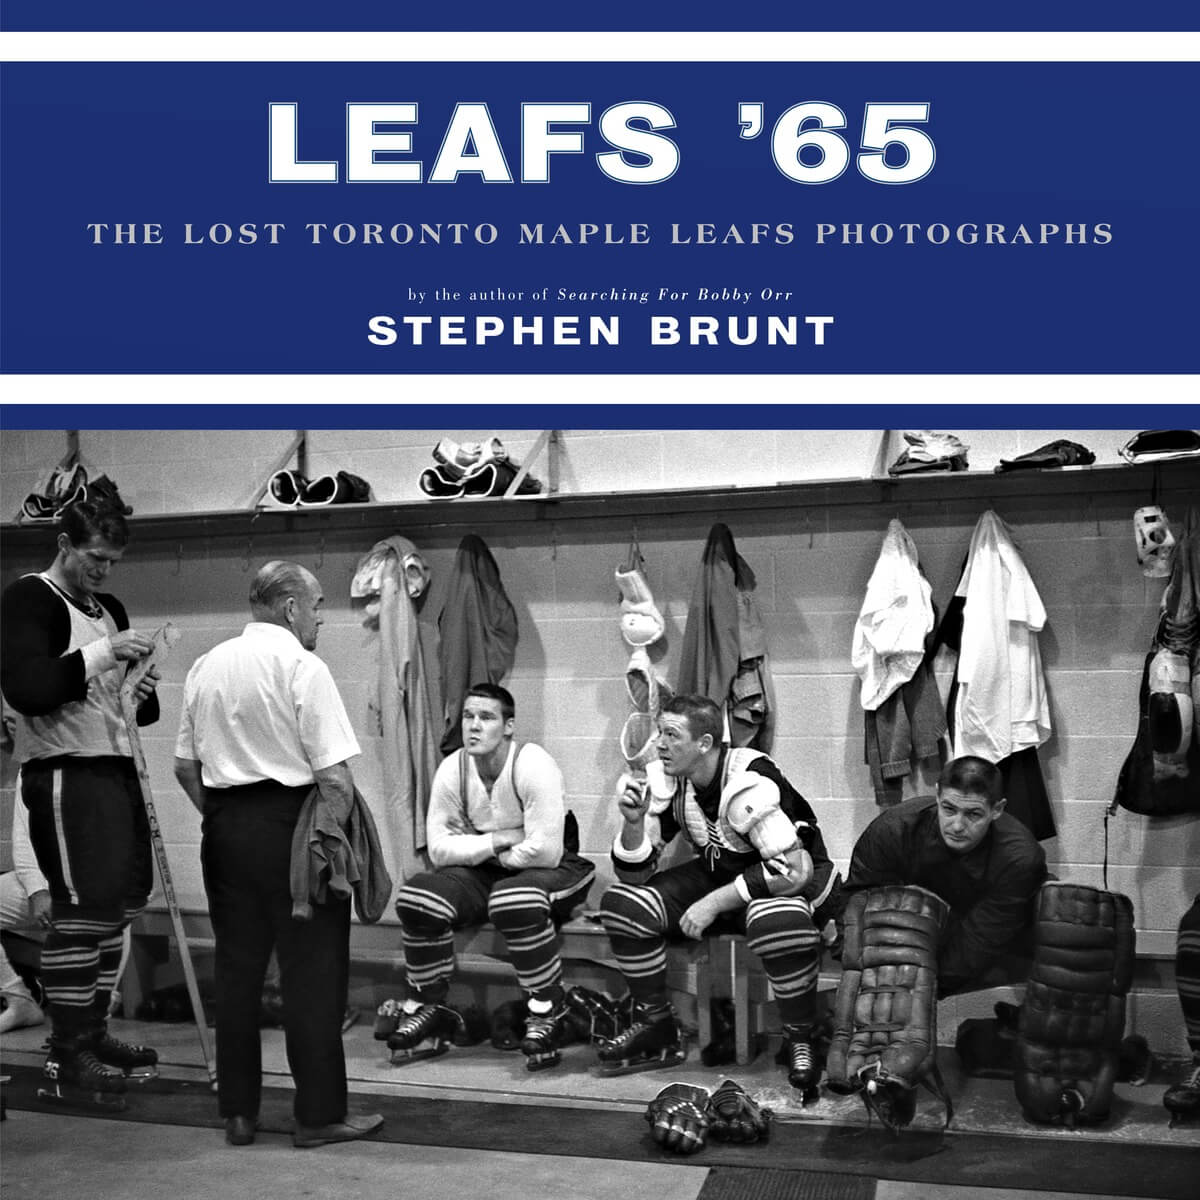 Leafs '65: The Lost Toronto Maple Leafs Photographs, by Stephen Brunt.